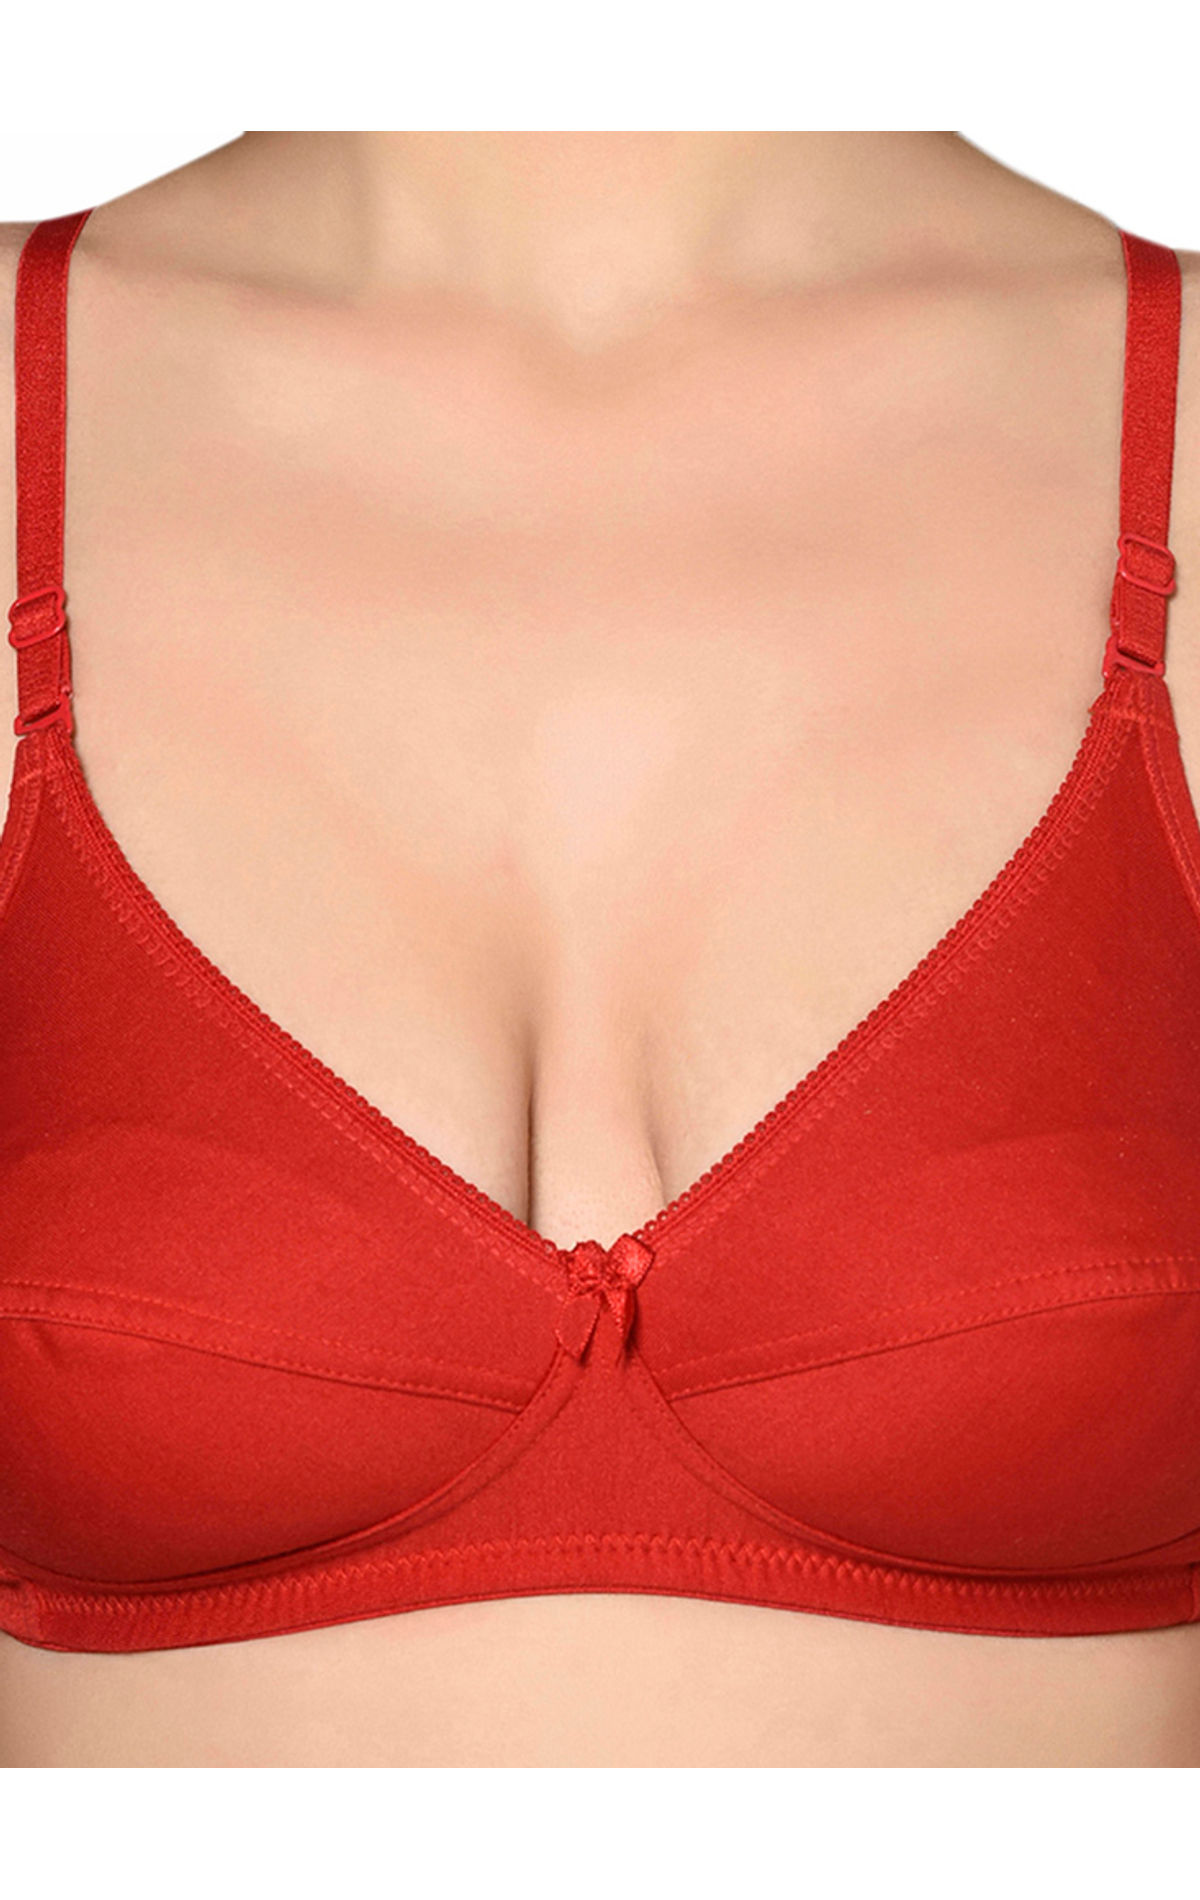 BODYCARE 1565 Cotton, Polyester Perfect Full Coverage Seamed Bra (36B) in  Jabalpur at best price by Shri Ambika Traders - Justdial